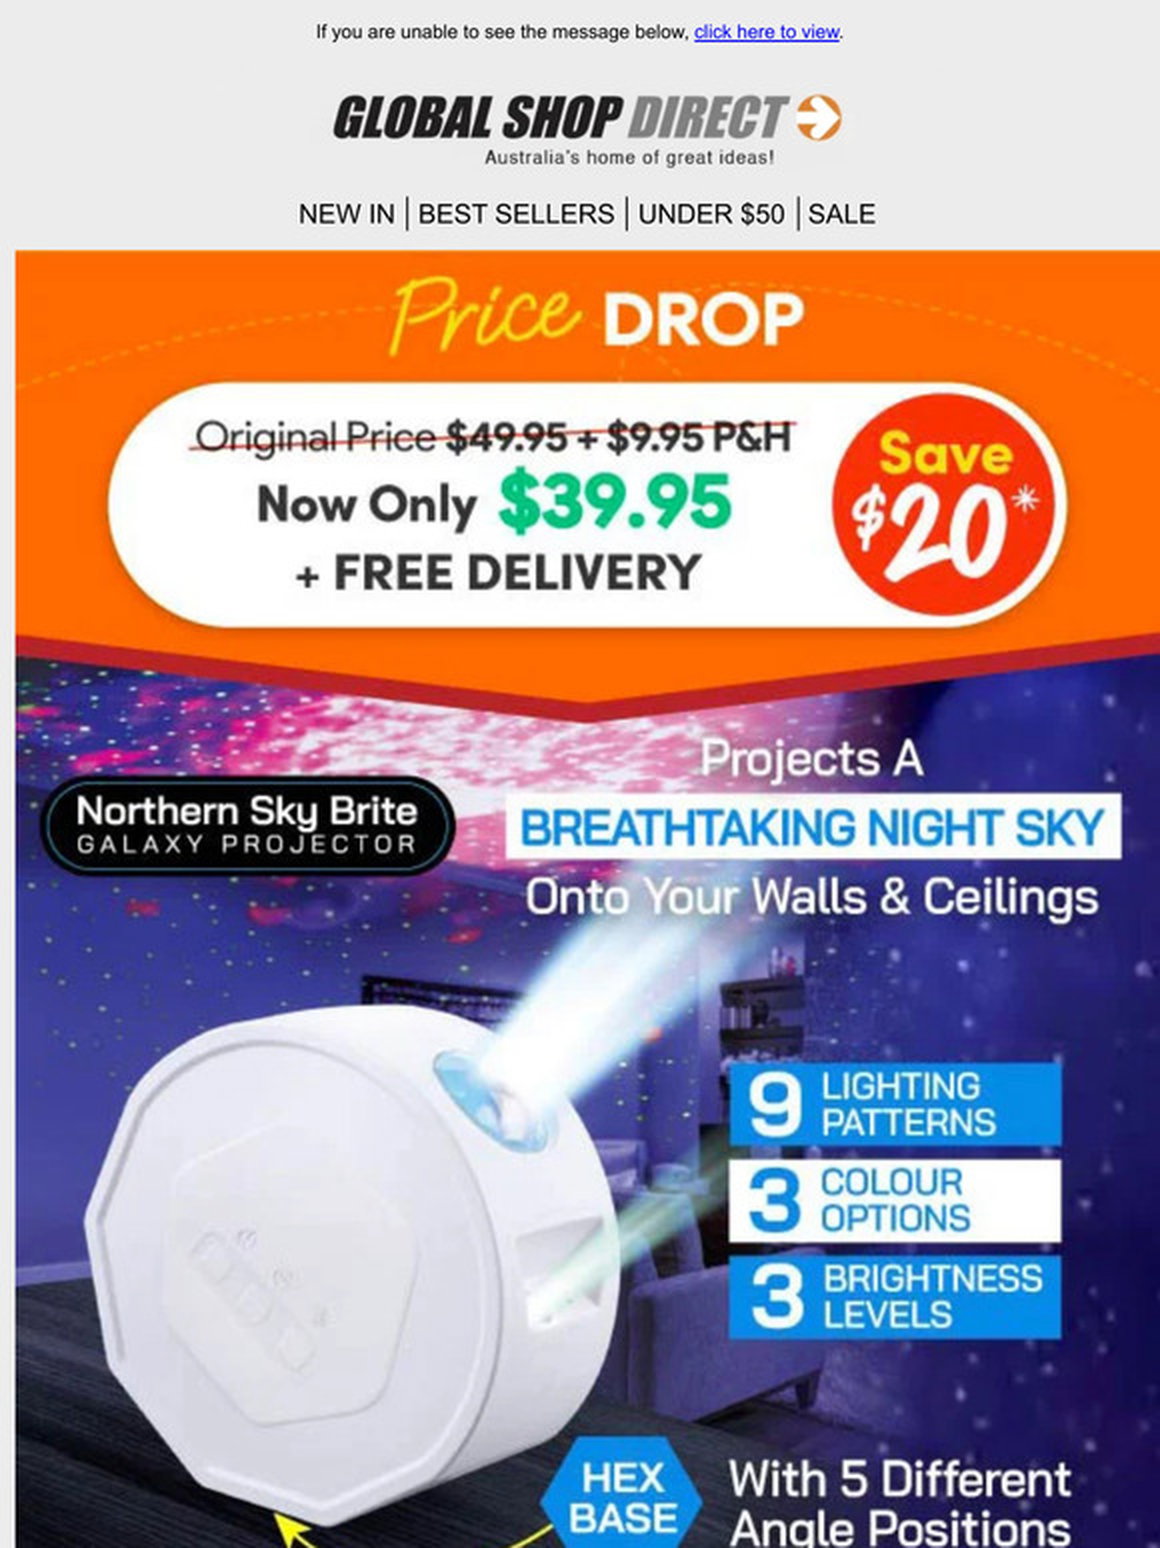 PRICE DROP: Northern Sky Brite Now Only $39.95!